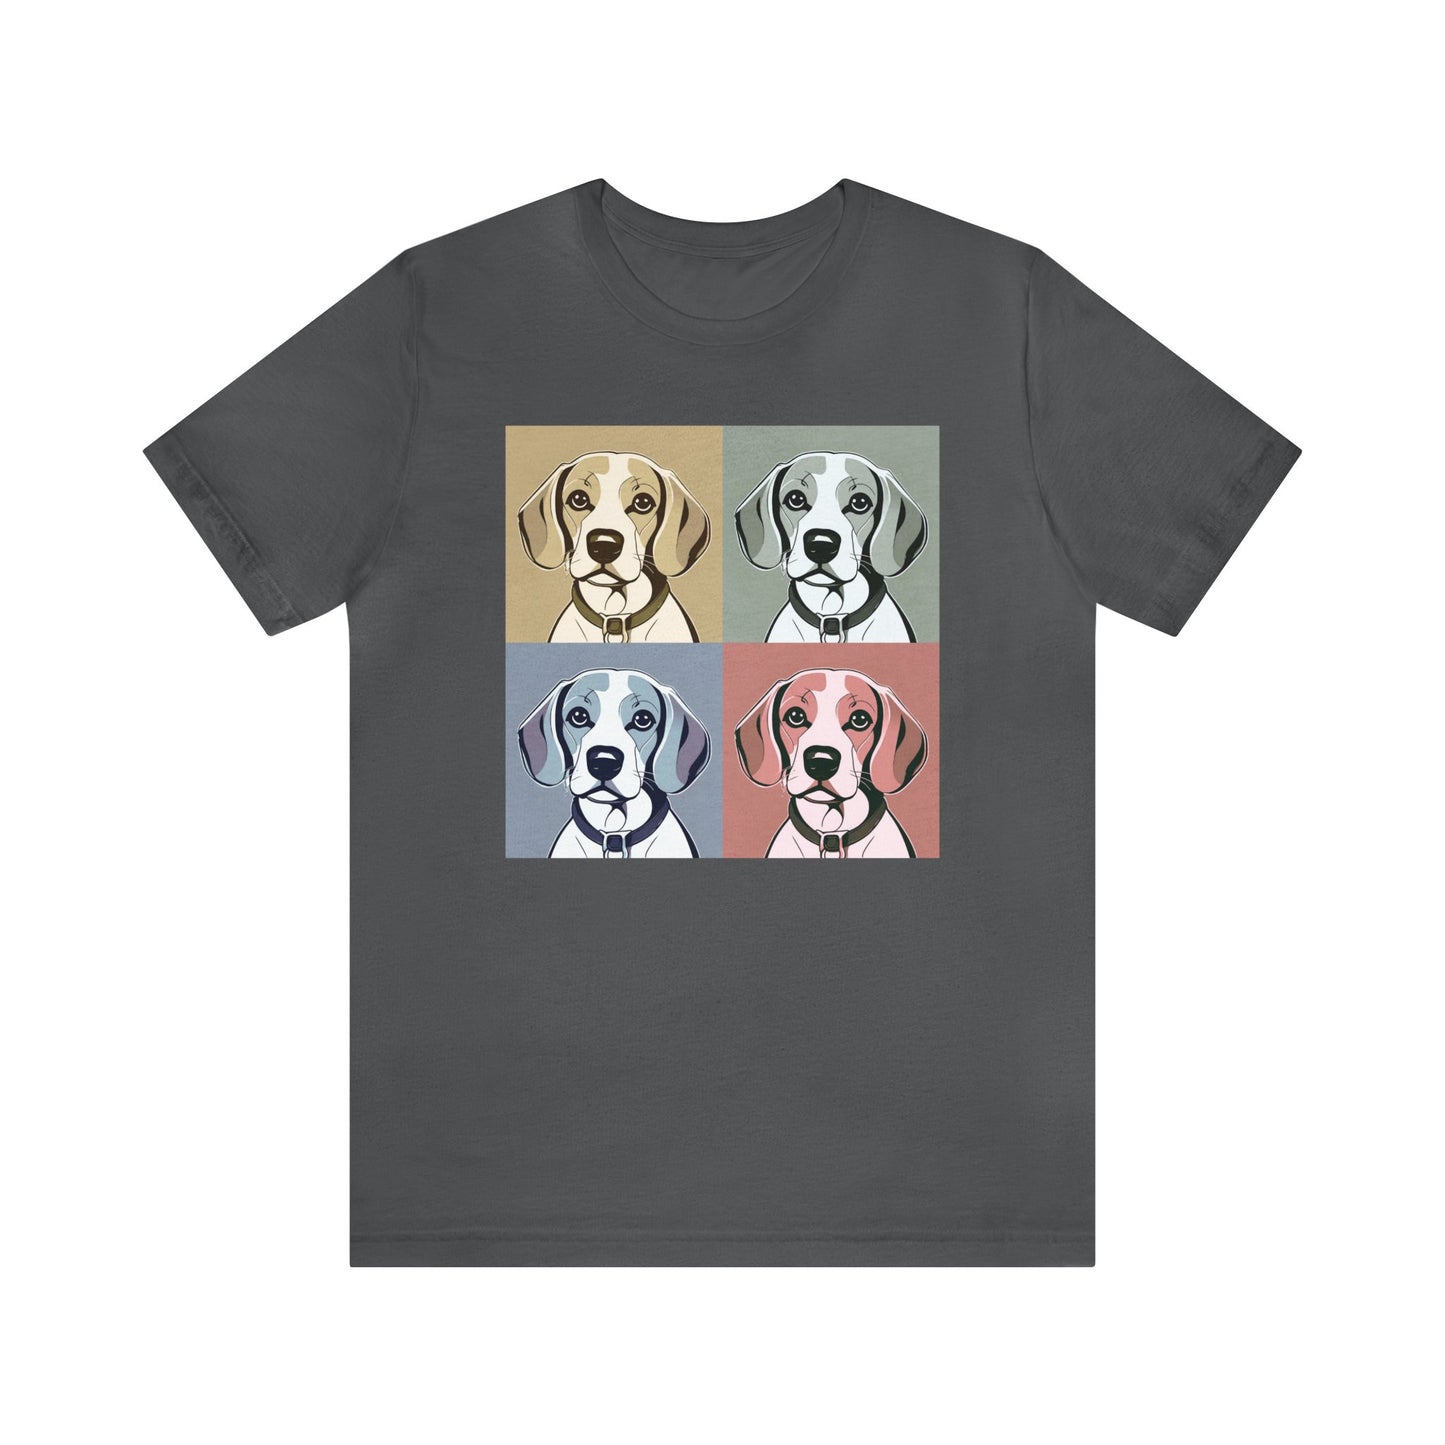 Beagle Tshirt, Black, ART Graphic T Shirt, Gifts for Her / Him, Dog Lovers Cute Cool Artistic